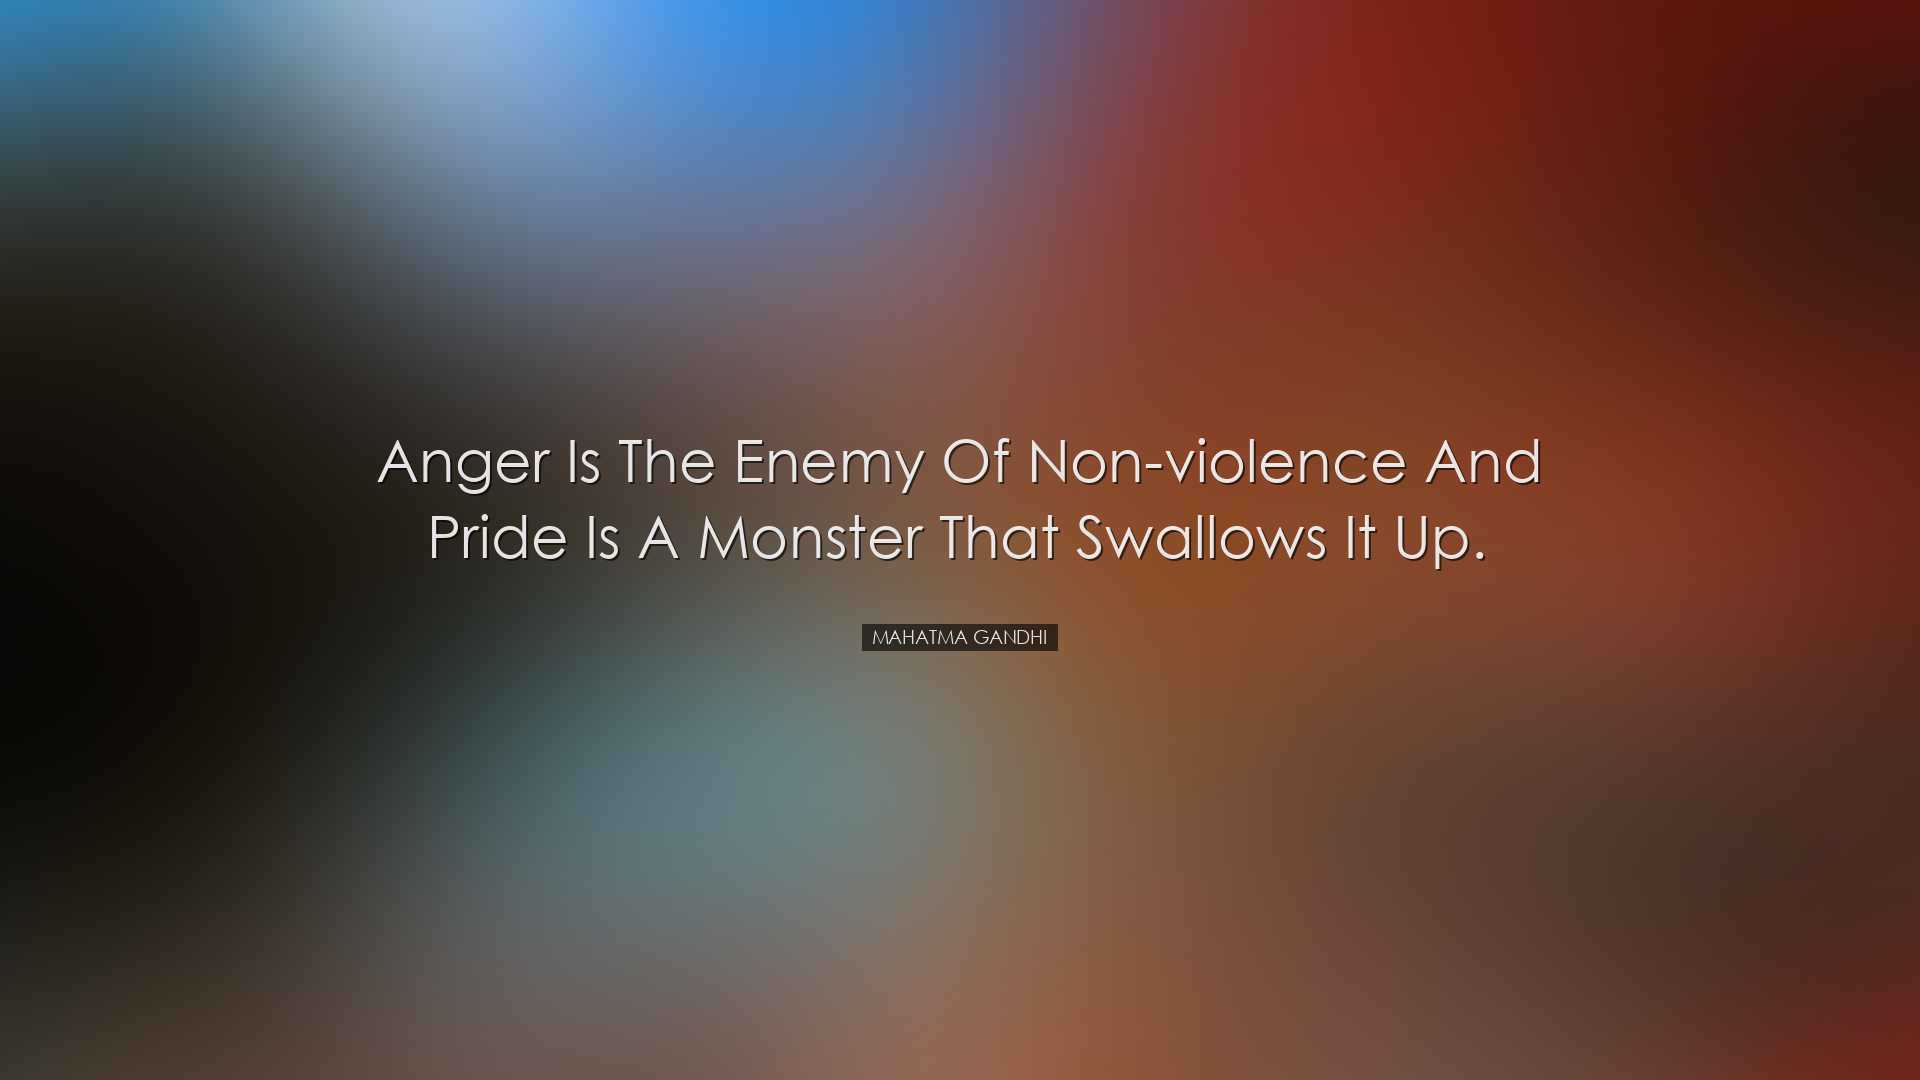 Anger is the enemy of non-violence and pride is a monster that swa